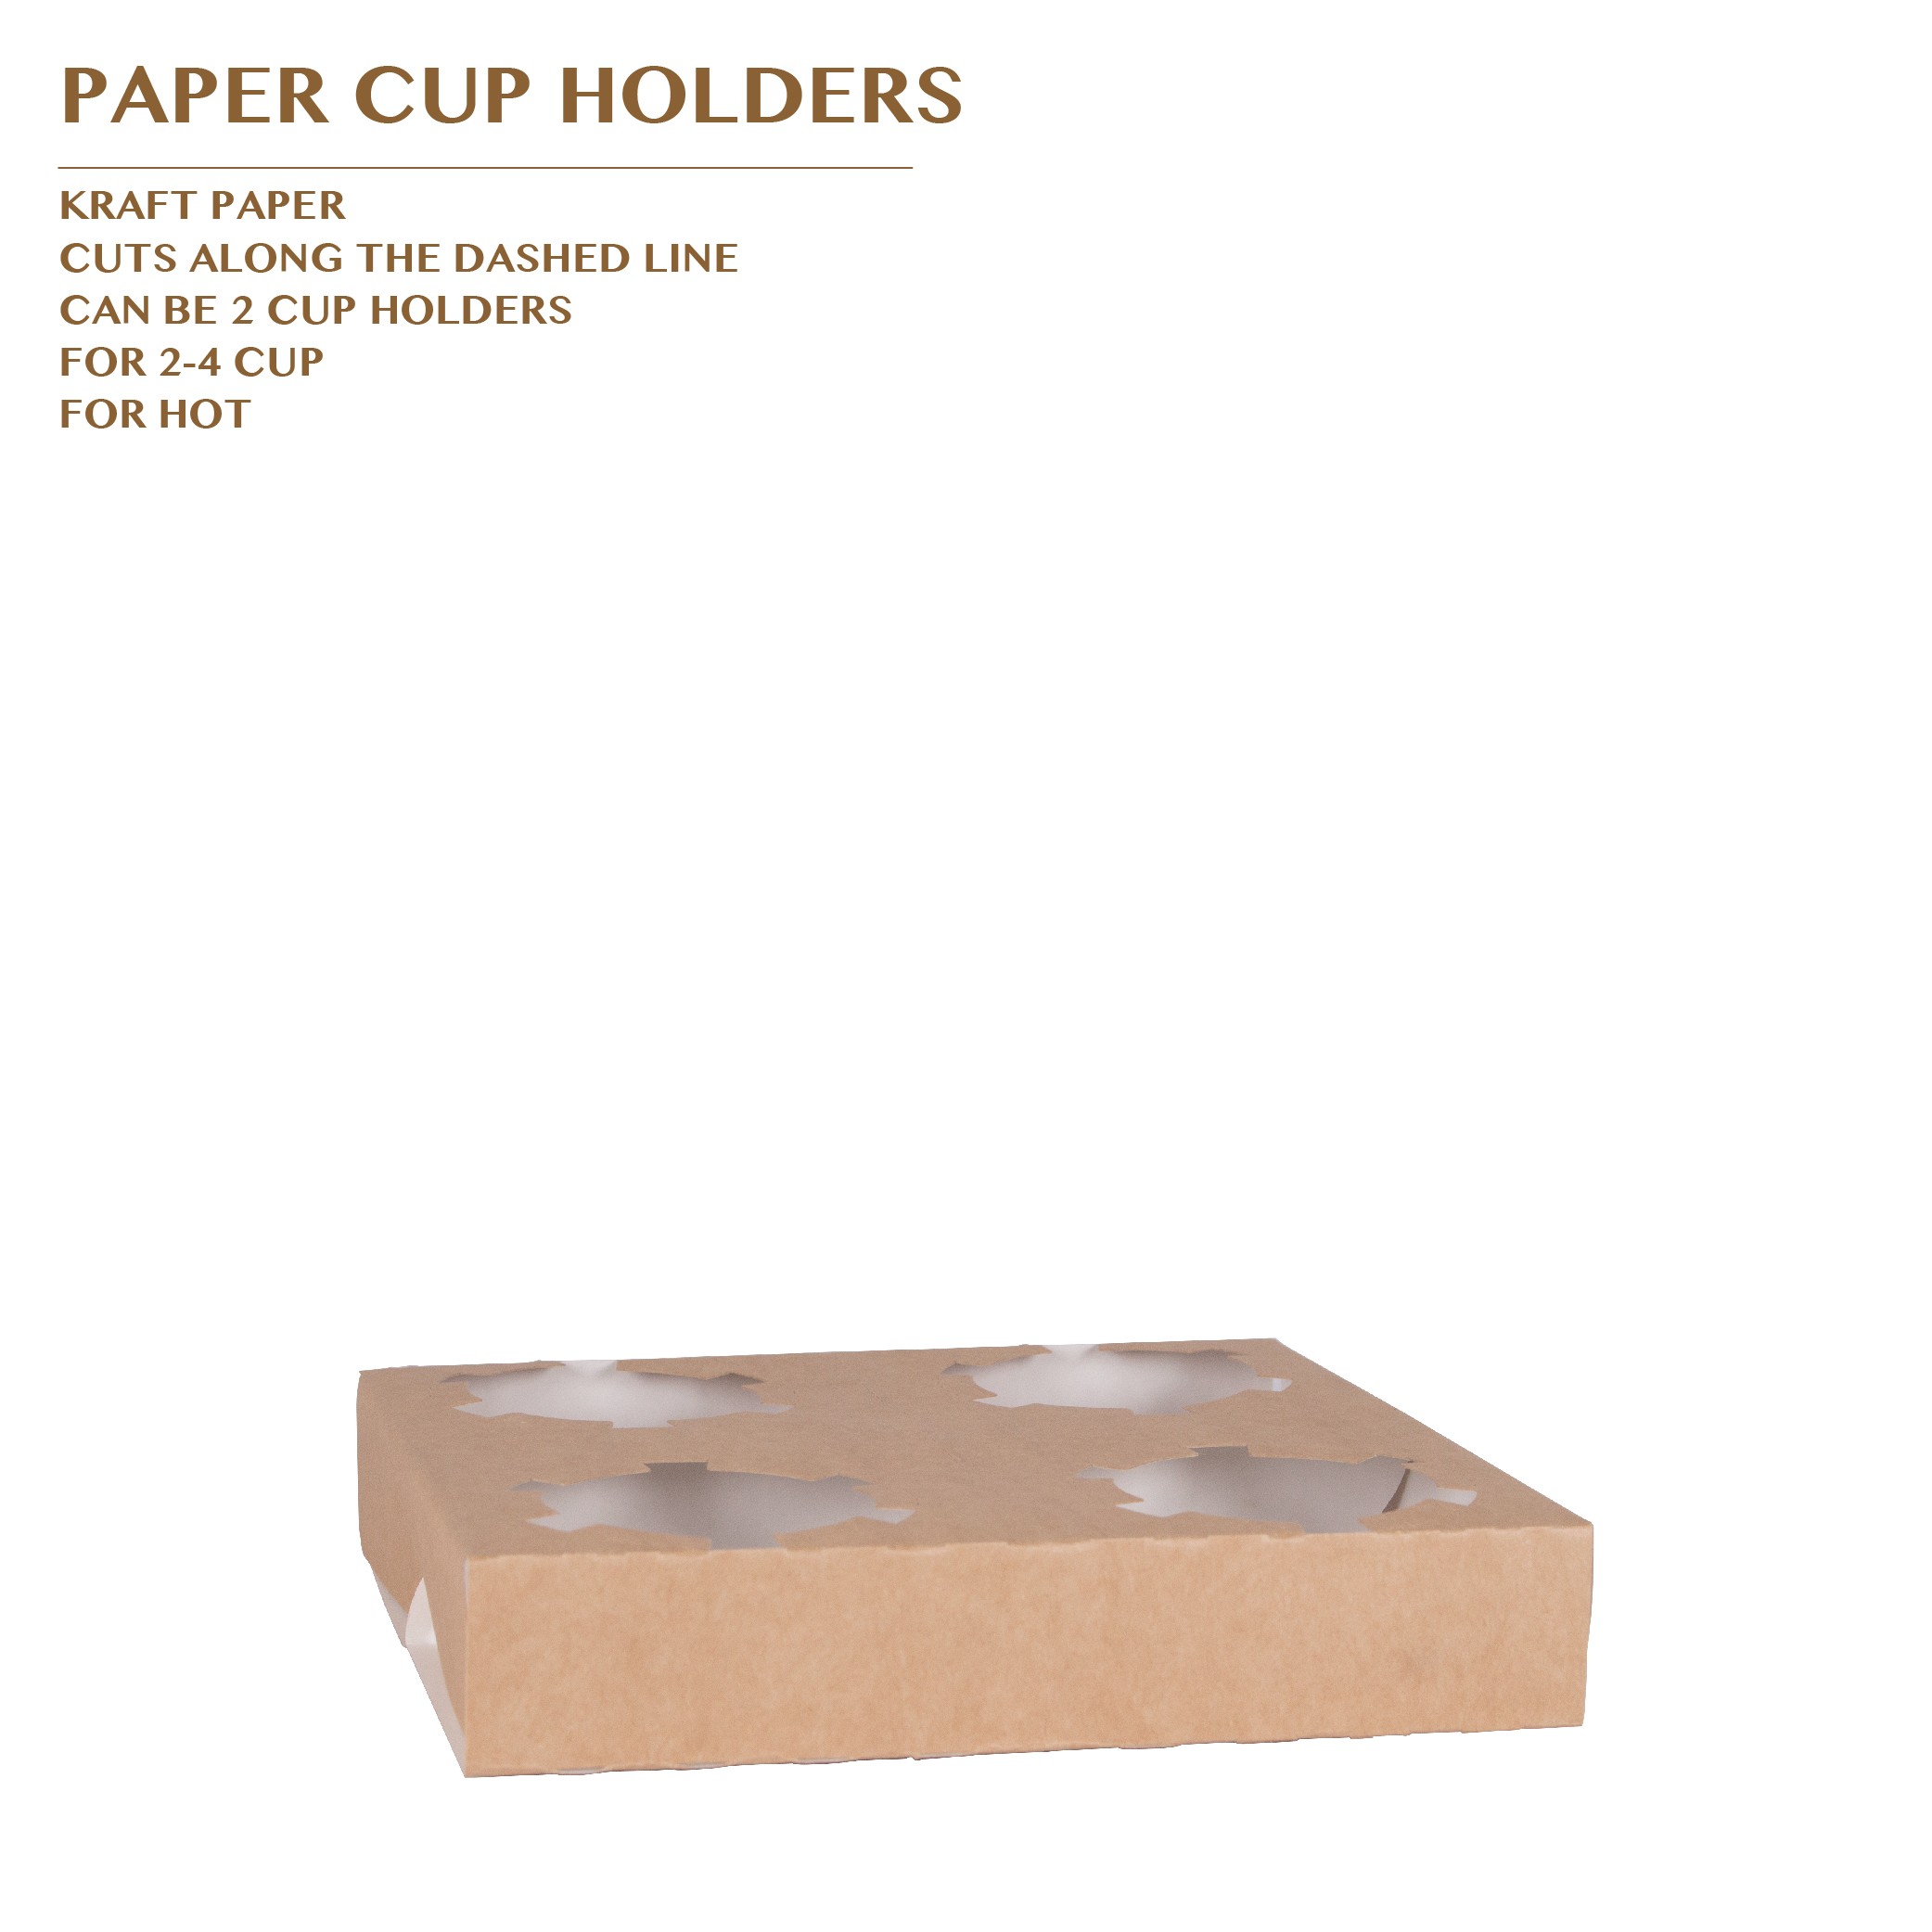 PAPER CUP HOLDERS FOR 4 CUP 600PCS/CTN